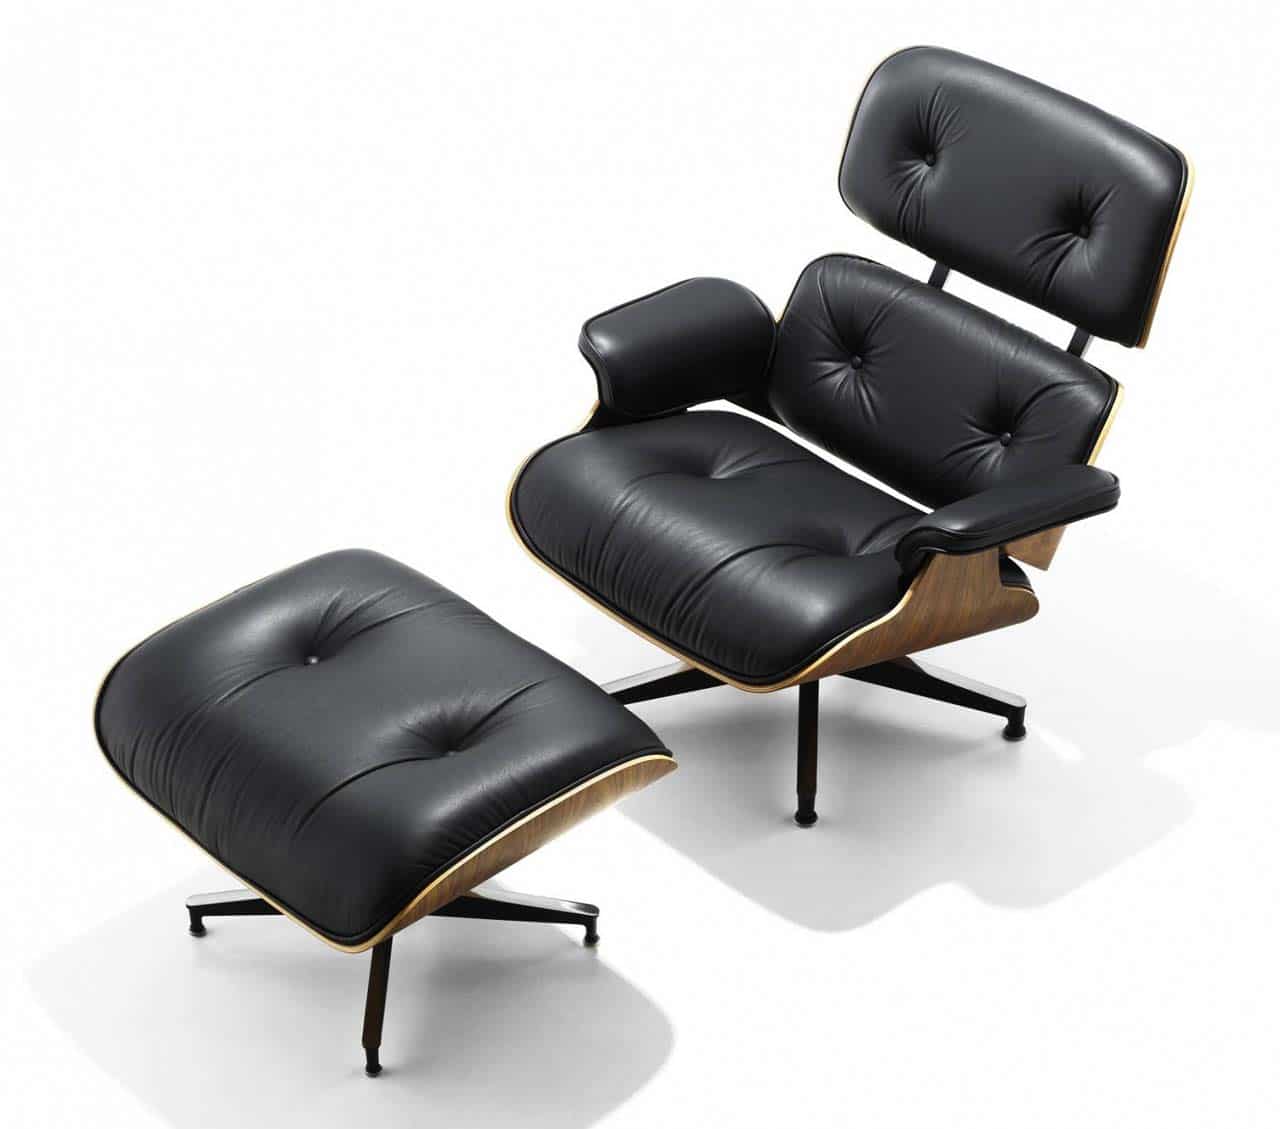 Modern Charles Eames Style Lounge Chair & Ottoman Set - Luxe Furnishes